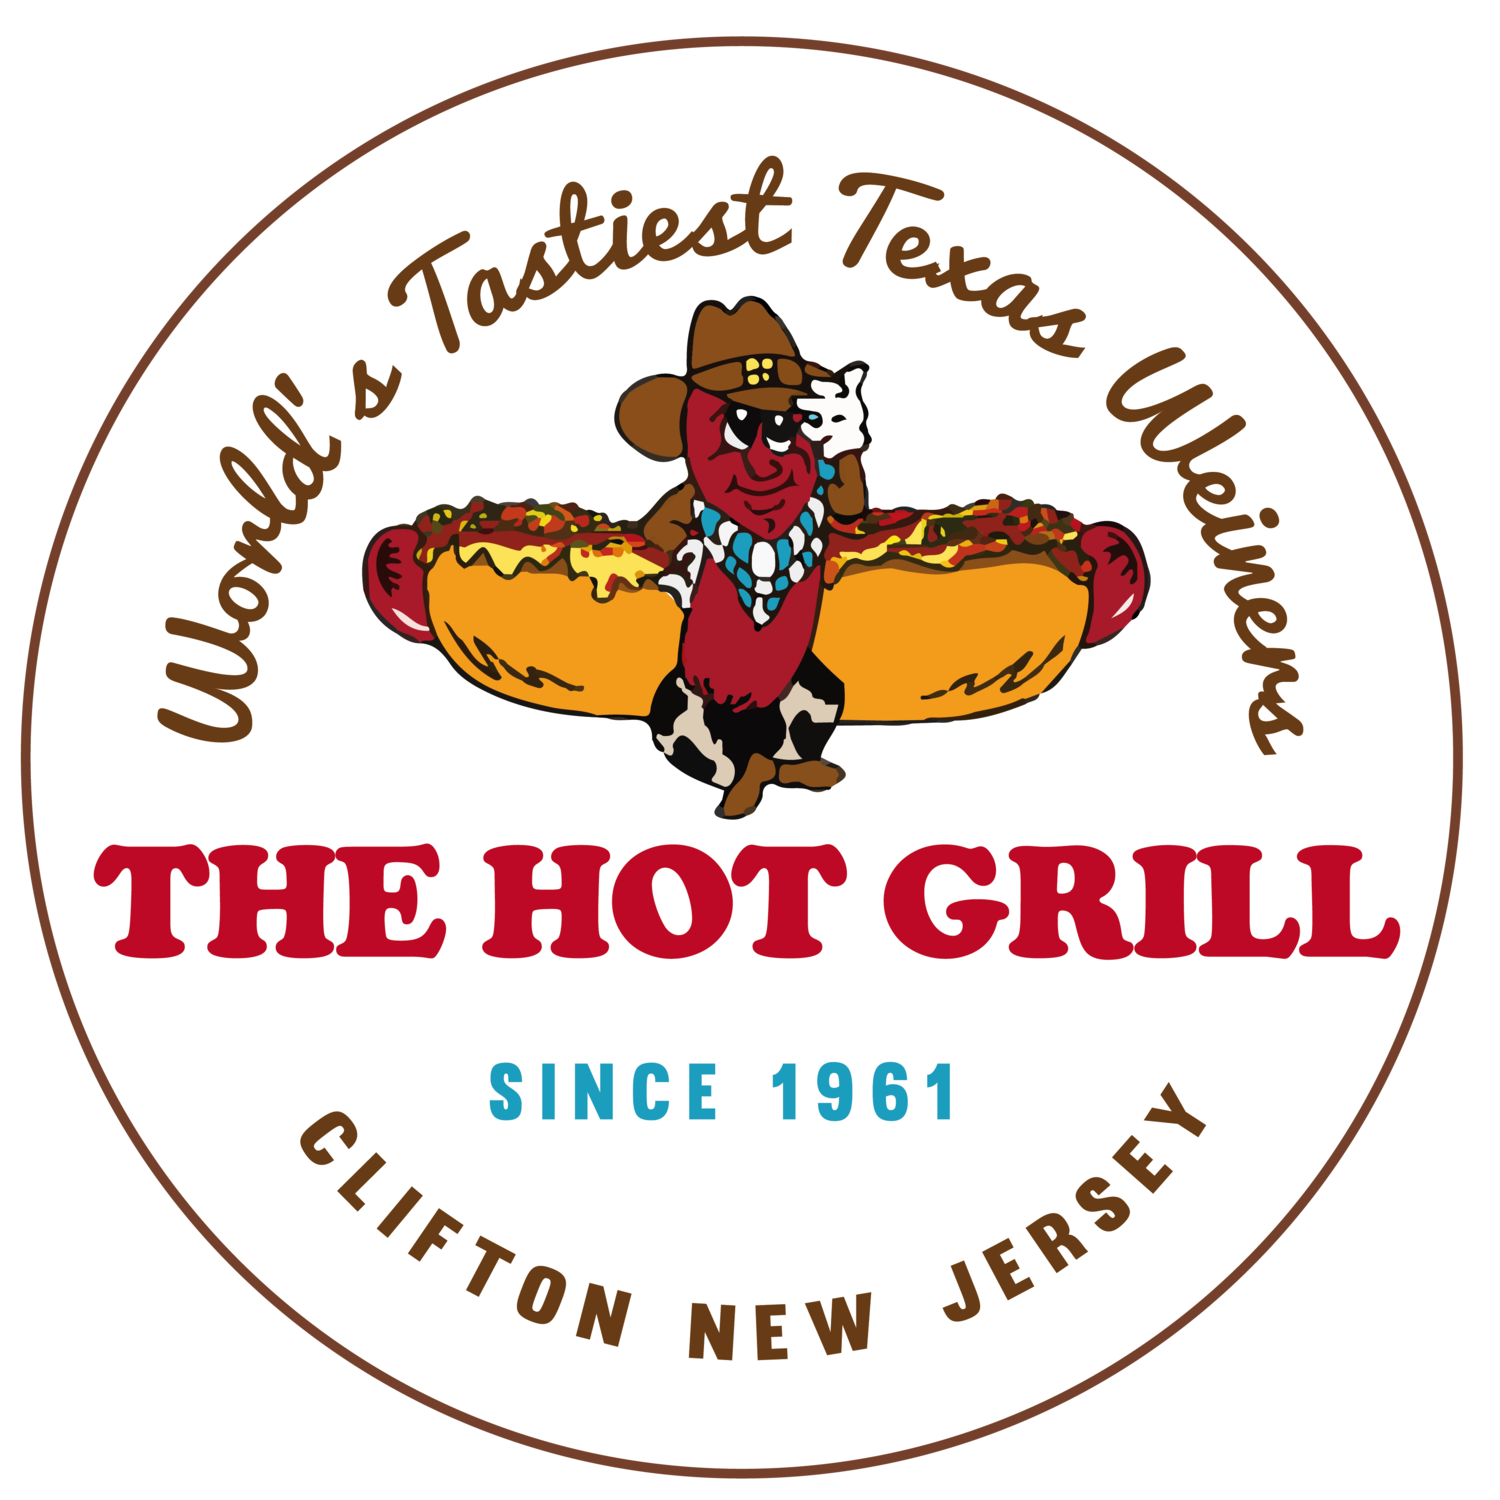 THE HOT GRILL